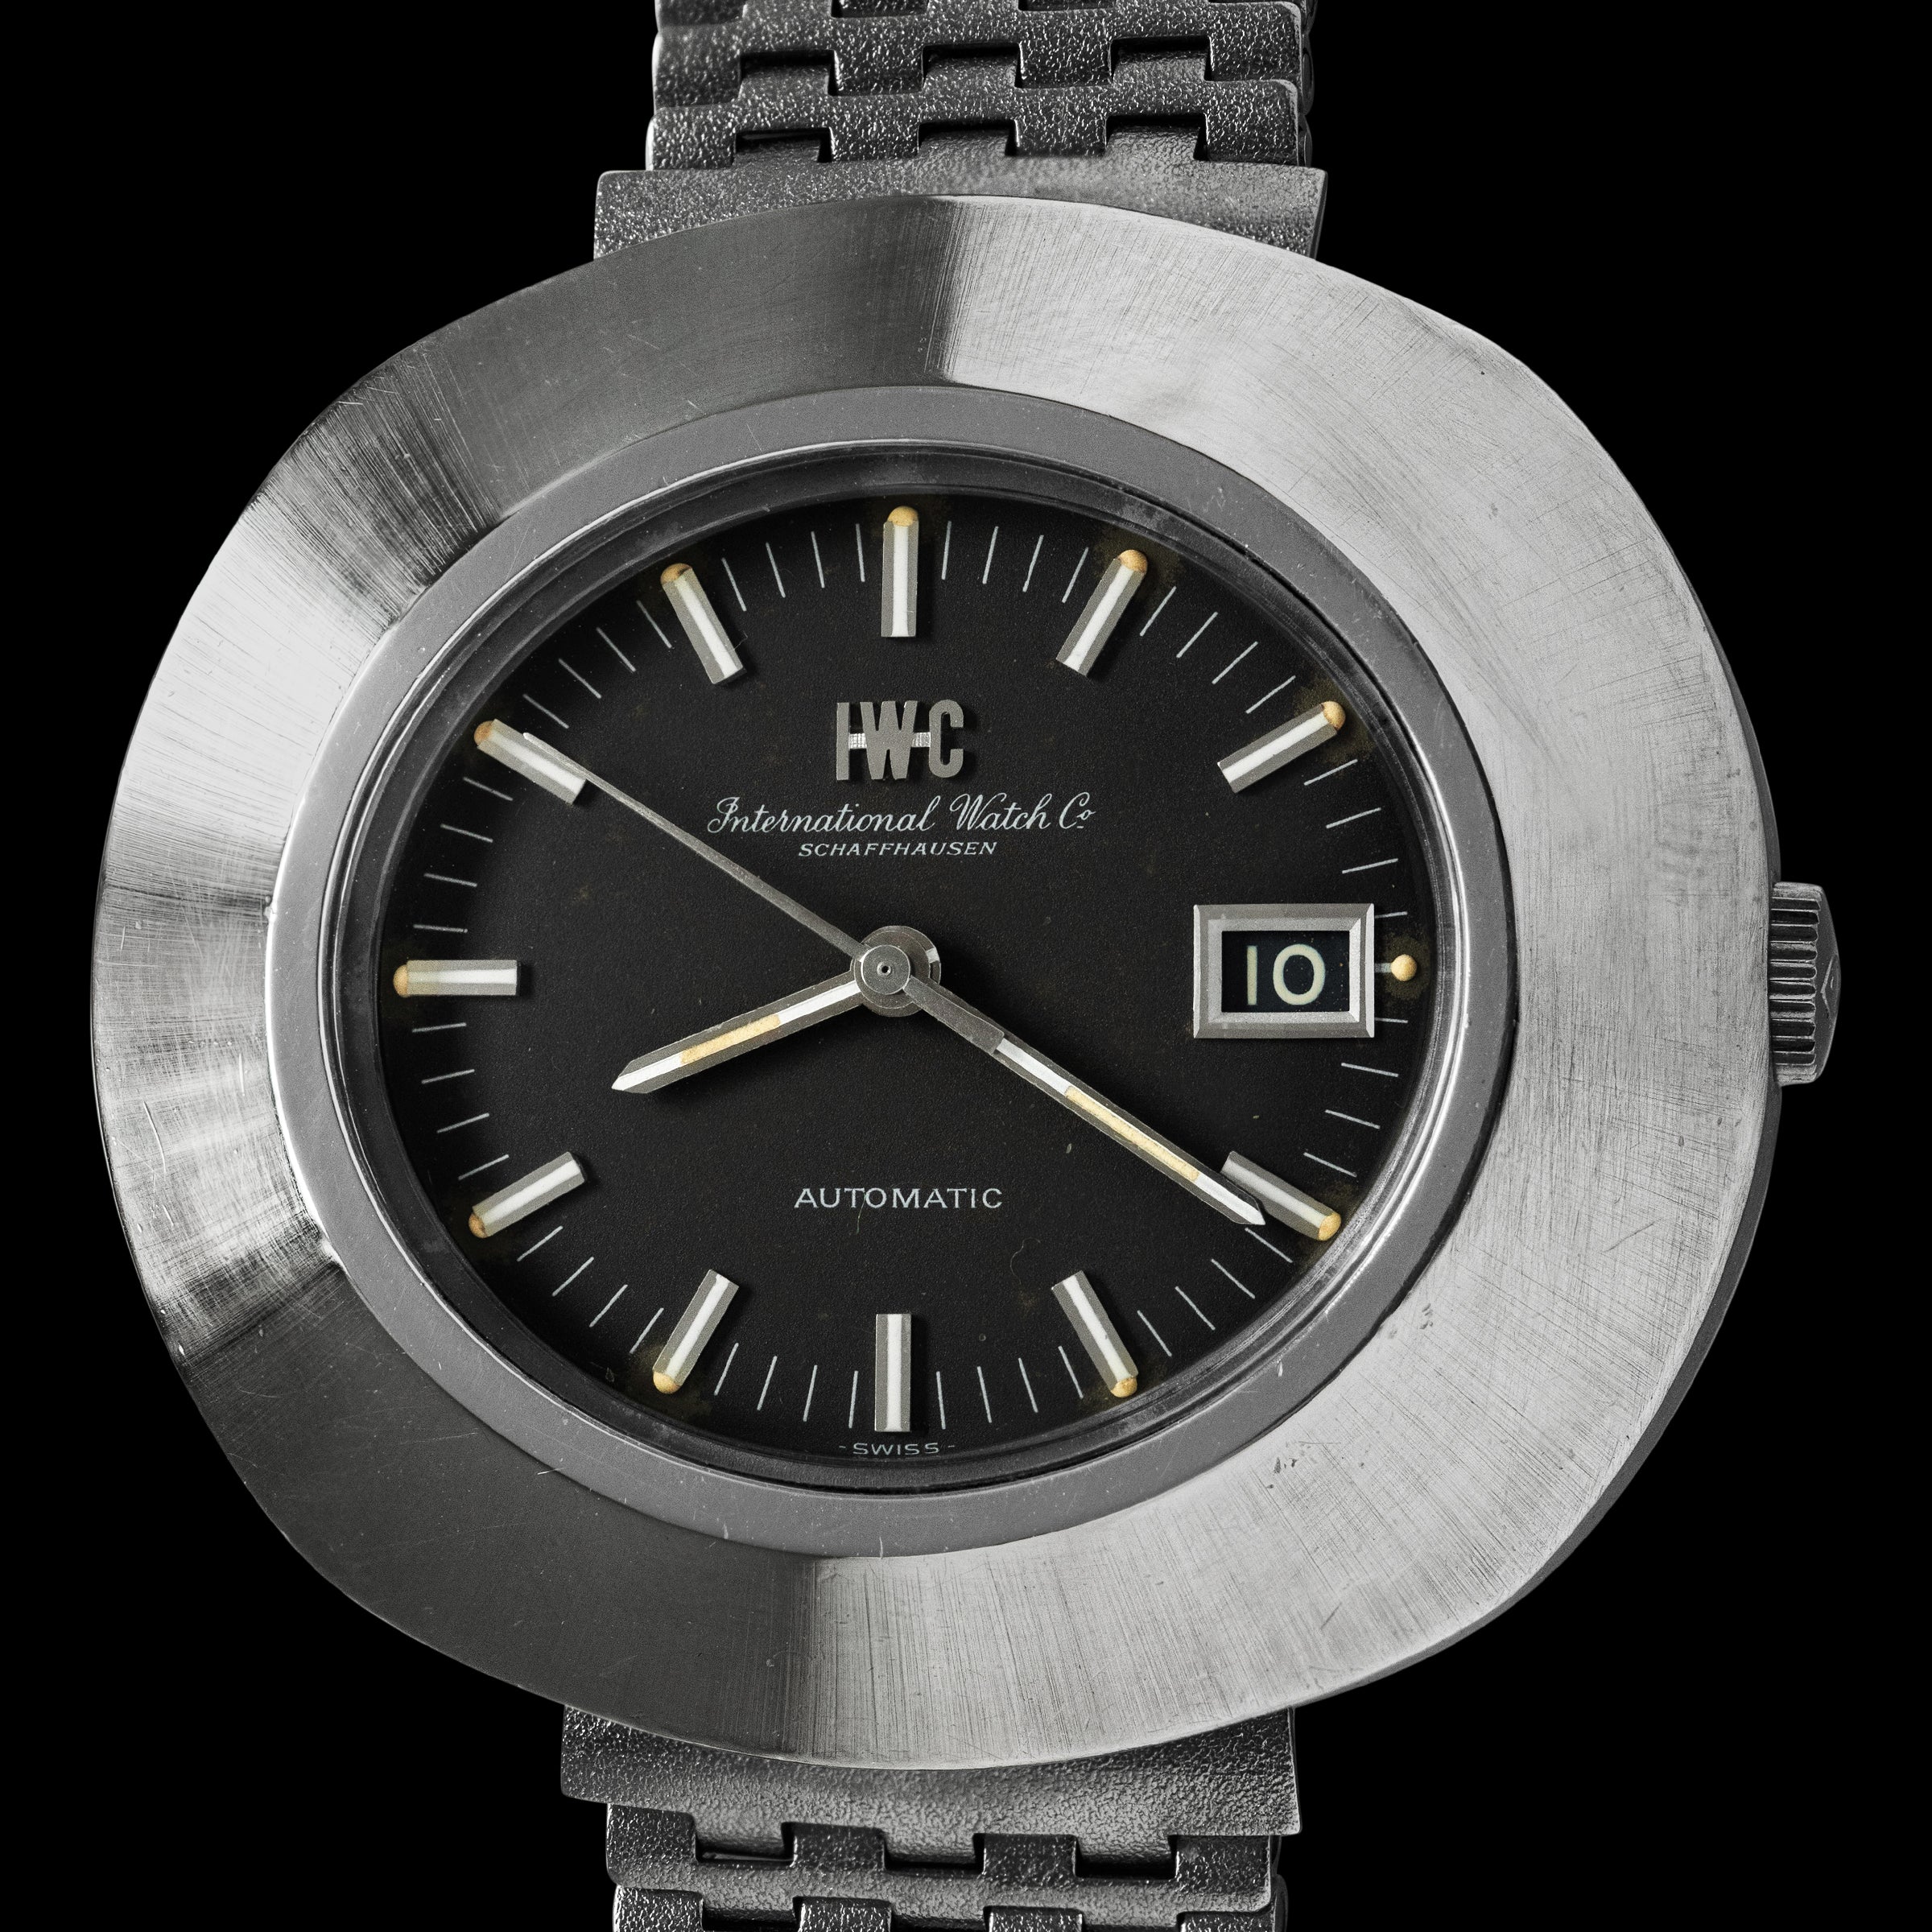 No. 622 / IWC Automatic - 1973 – From Time To Times